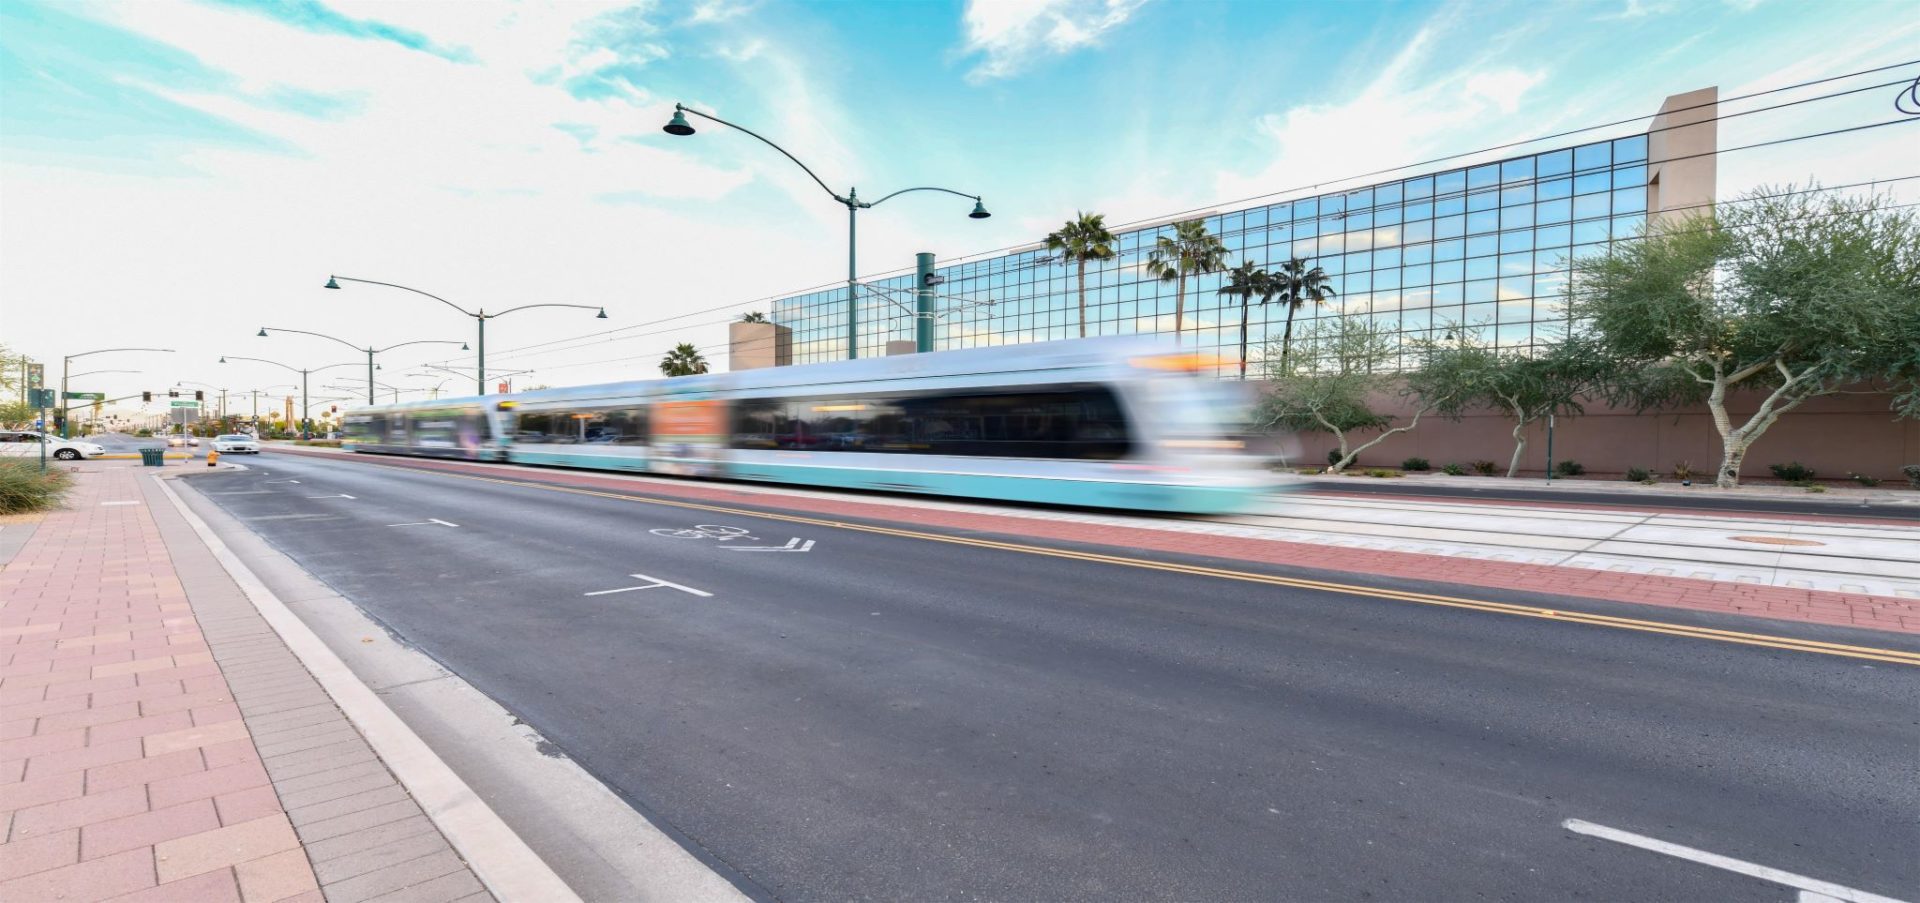 Downtown Mesa Lightrail near commercial real estate project